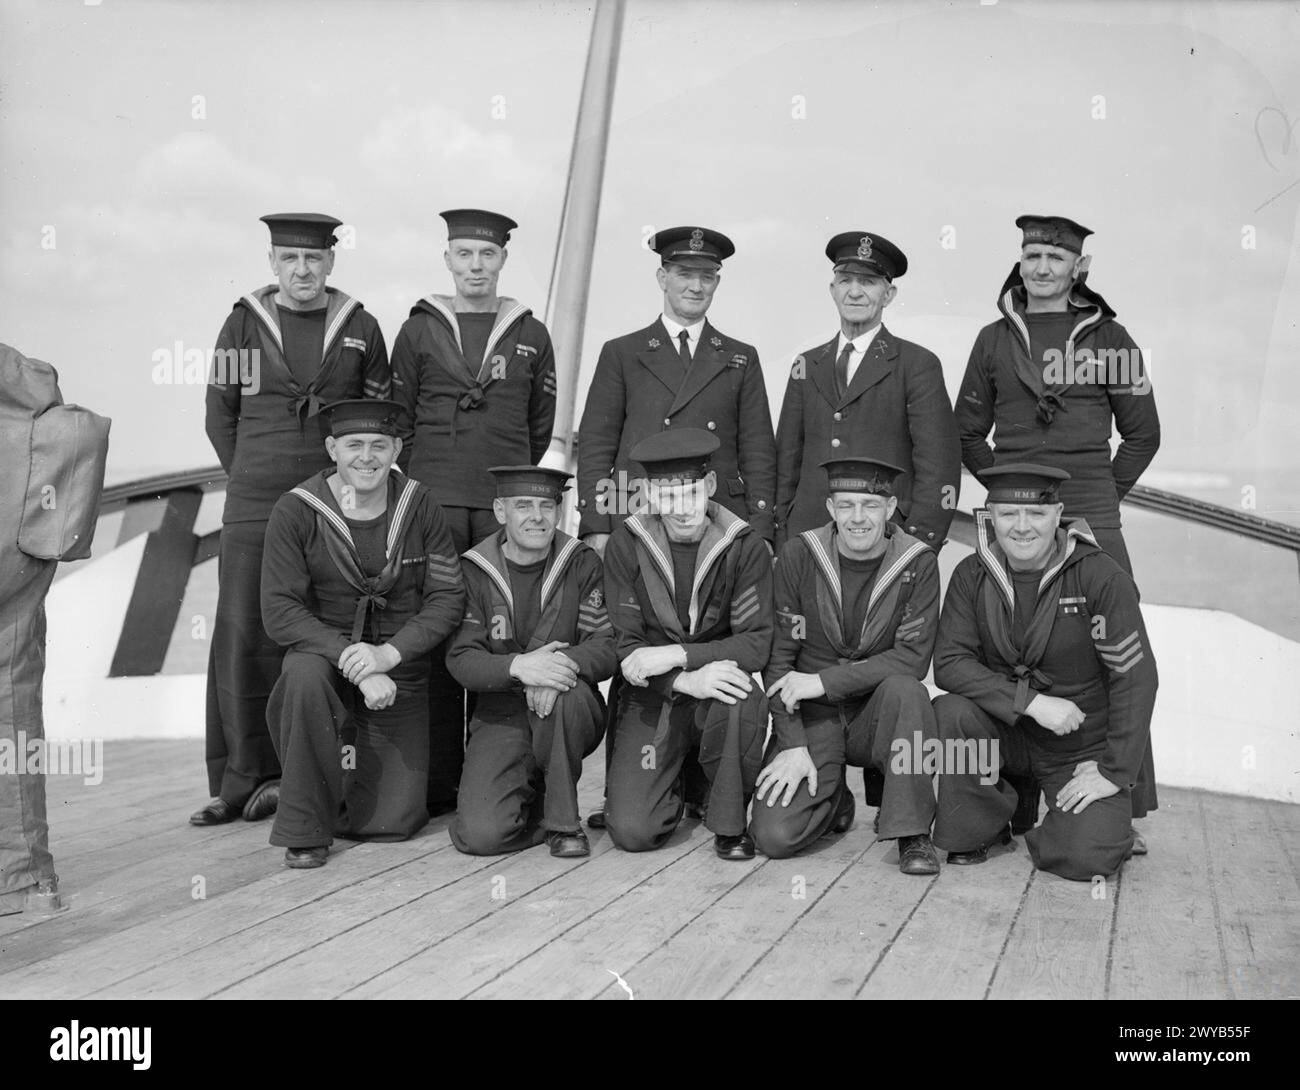 VETERANS OF A VETERAN SHIP. 9 OCTOBER 1944, PORTSMOUTH. A GROUP OF 10 VETERAN SEAMAN SERVING WITH THE TRAINING SHIP HMS IMPLACABLE, WHICH, AS THE FRENCH WARSHIP DUGAY-TROUIN FOUGHT AT TRAFALGAR IN 1805. THEY HAVE A TOTAL SERVICE WITH THE ROYAL NAVY OF 237 YEARS AND THEIR AGES TOTAL 520 YEARS. - Left to right: (front row) AB Charles Morris, DSM, of Haselmere, aged 44 with 30 years service; AB Charles White, of Reading, aged 56, 18 years service; AB G Whittington, of Freshwater, I of W, aged 60, 28 years service; L/S J Cussen, of Southsea, aged 43, 25 years service; AB A Wilson, of Portsmouth, a Stock Photo